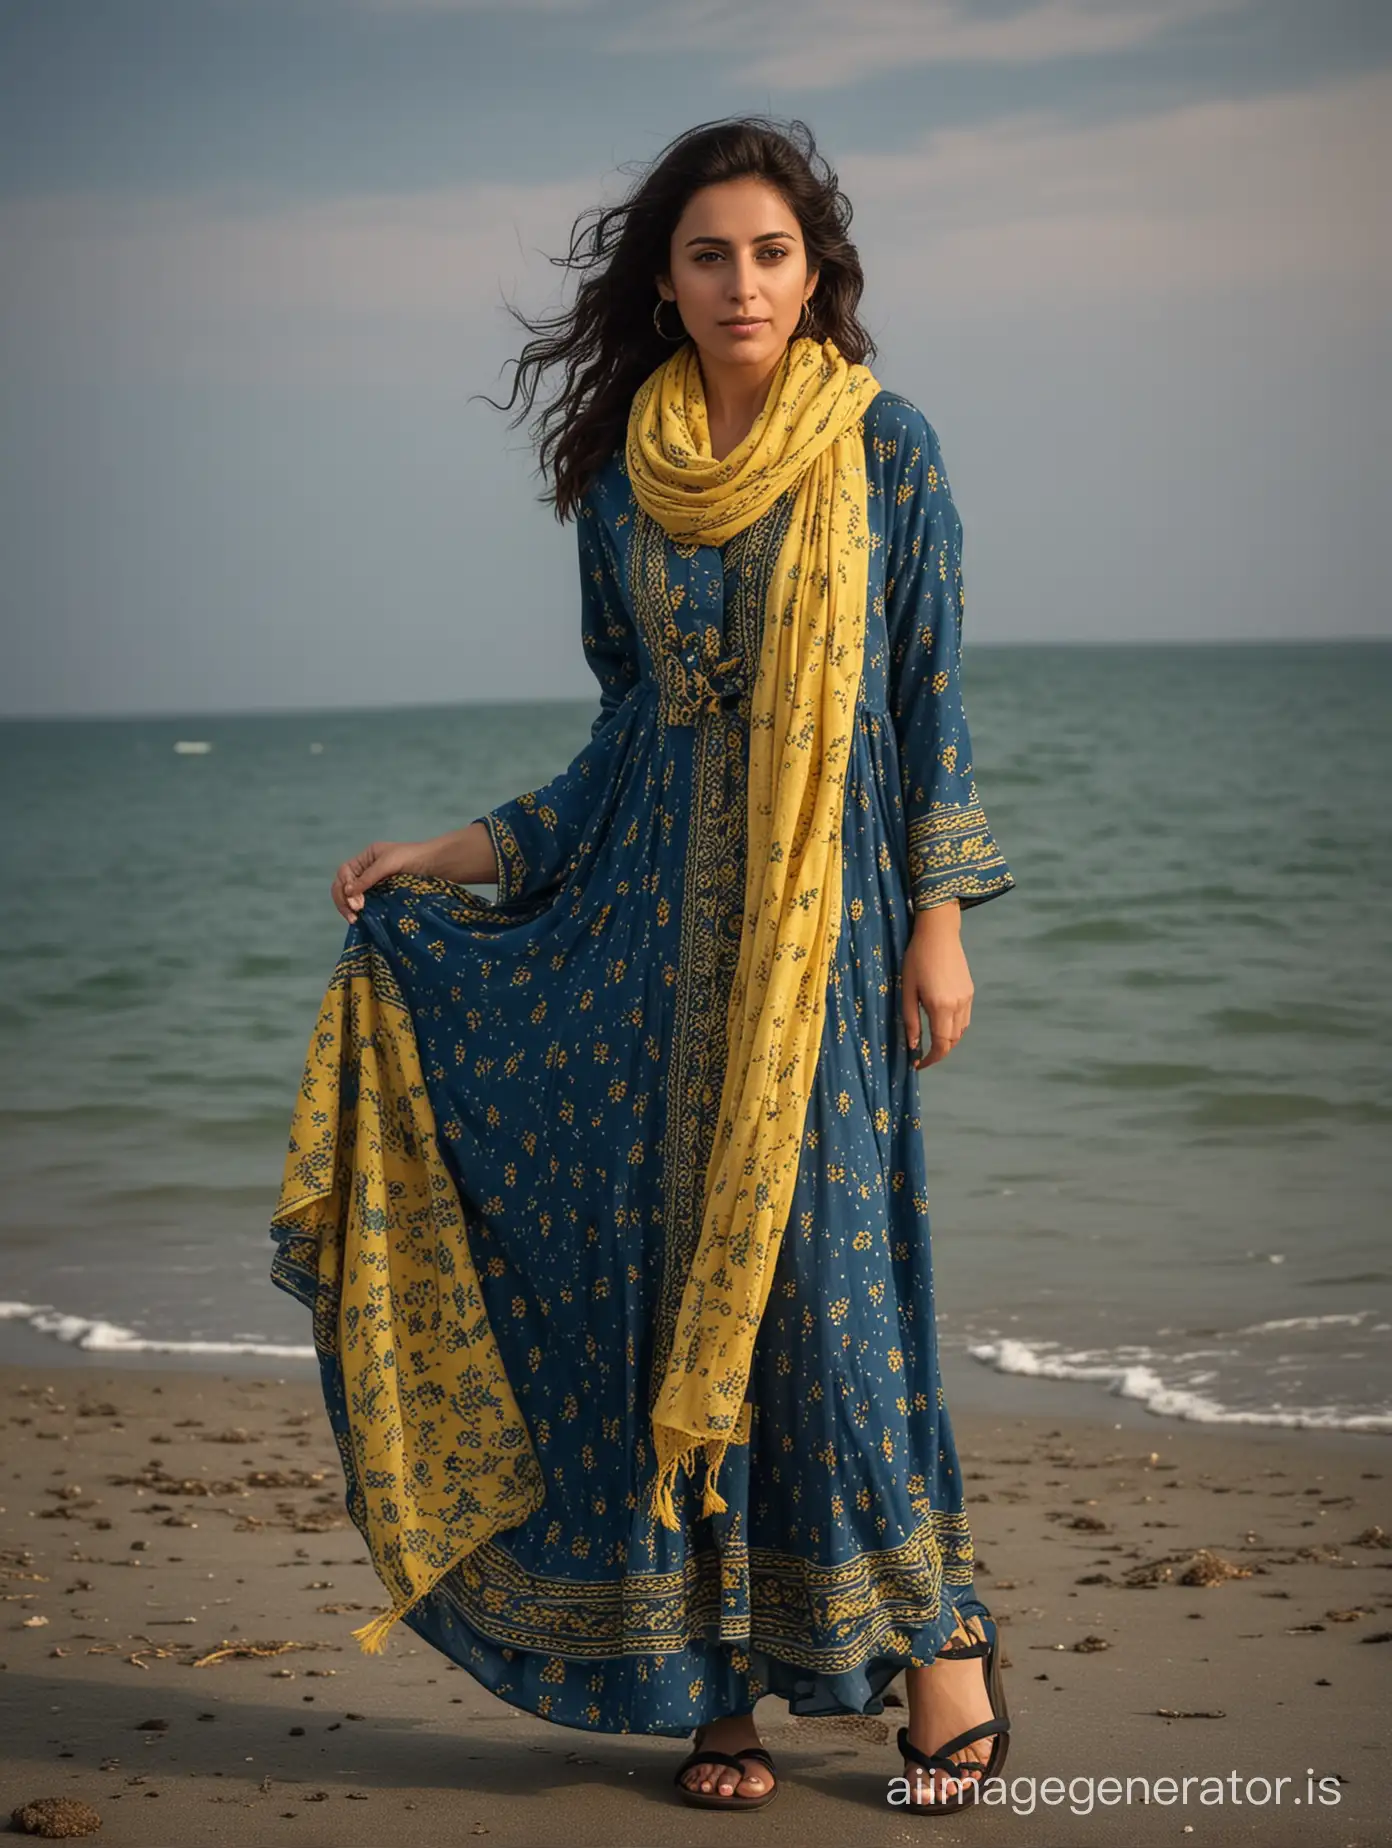 Iranian woman 35 years old, blue long cozy dress with yellow pattern, black sandals, scarf, full body shot, in sea side, dramatic lighting